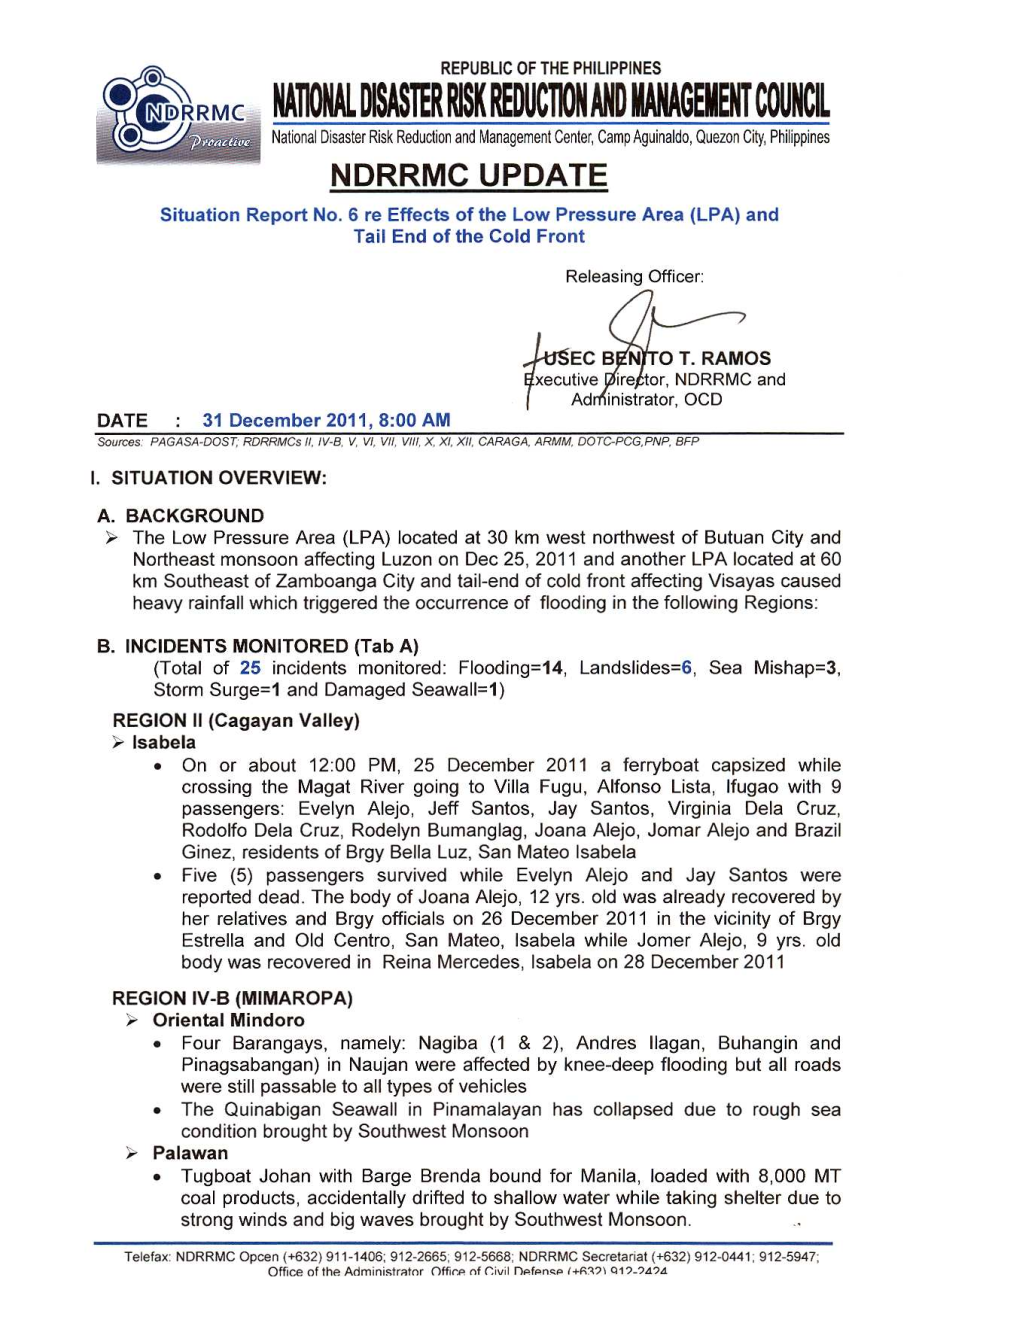 NDRRMC Update on Sitrep No 6 Re Effects of LPA 31 December 2011 At